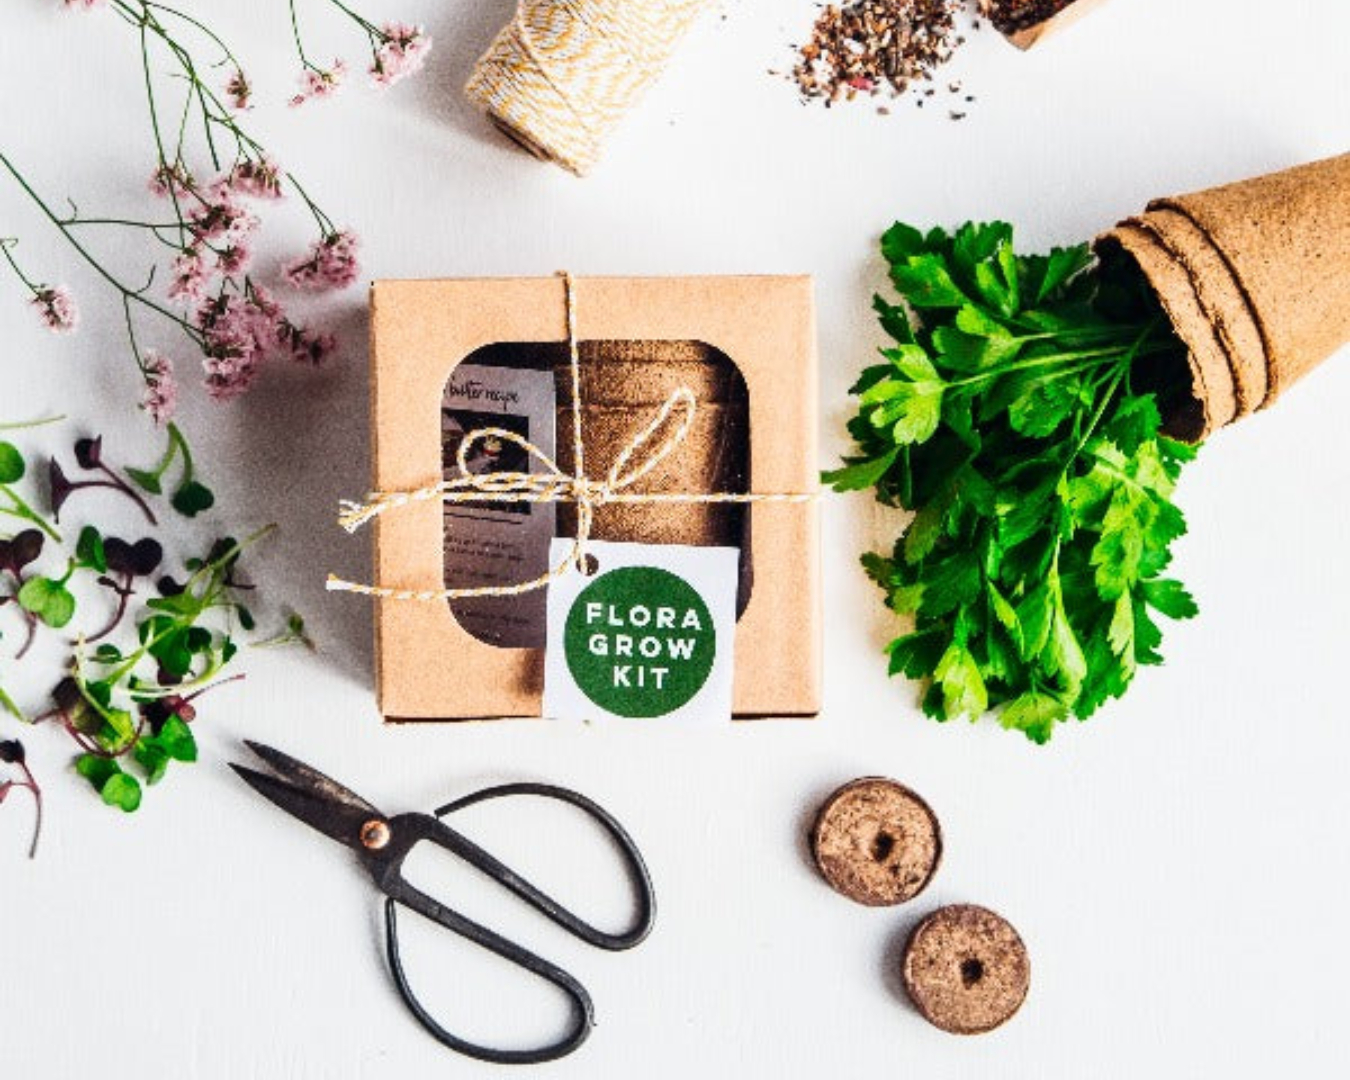 The adorable kitchen herb kit is displayed alongside scissors, twine, and a bundle of parsley